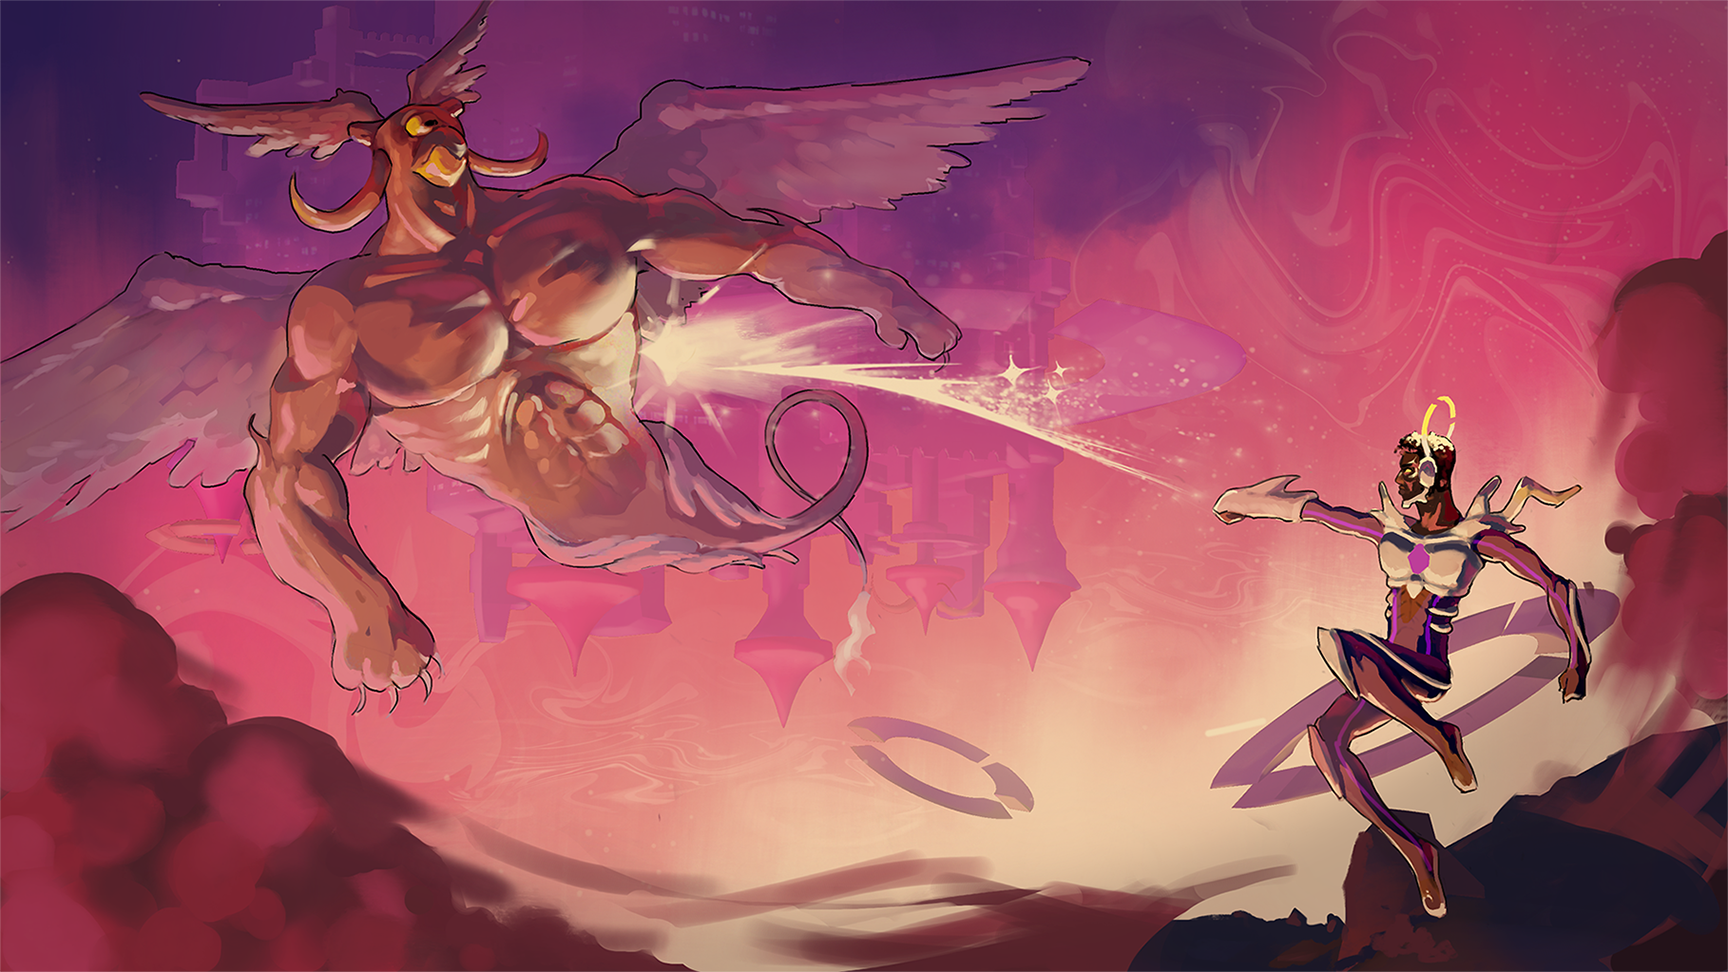 Two angels, one bestial and one human fighting each other in a pink sky with a castle in the background.